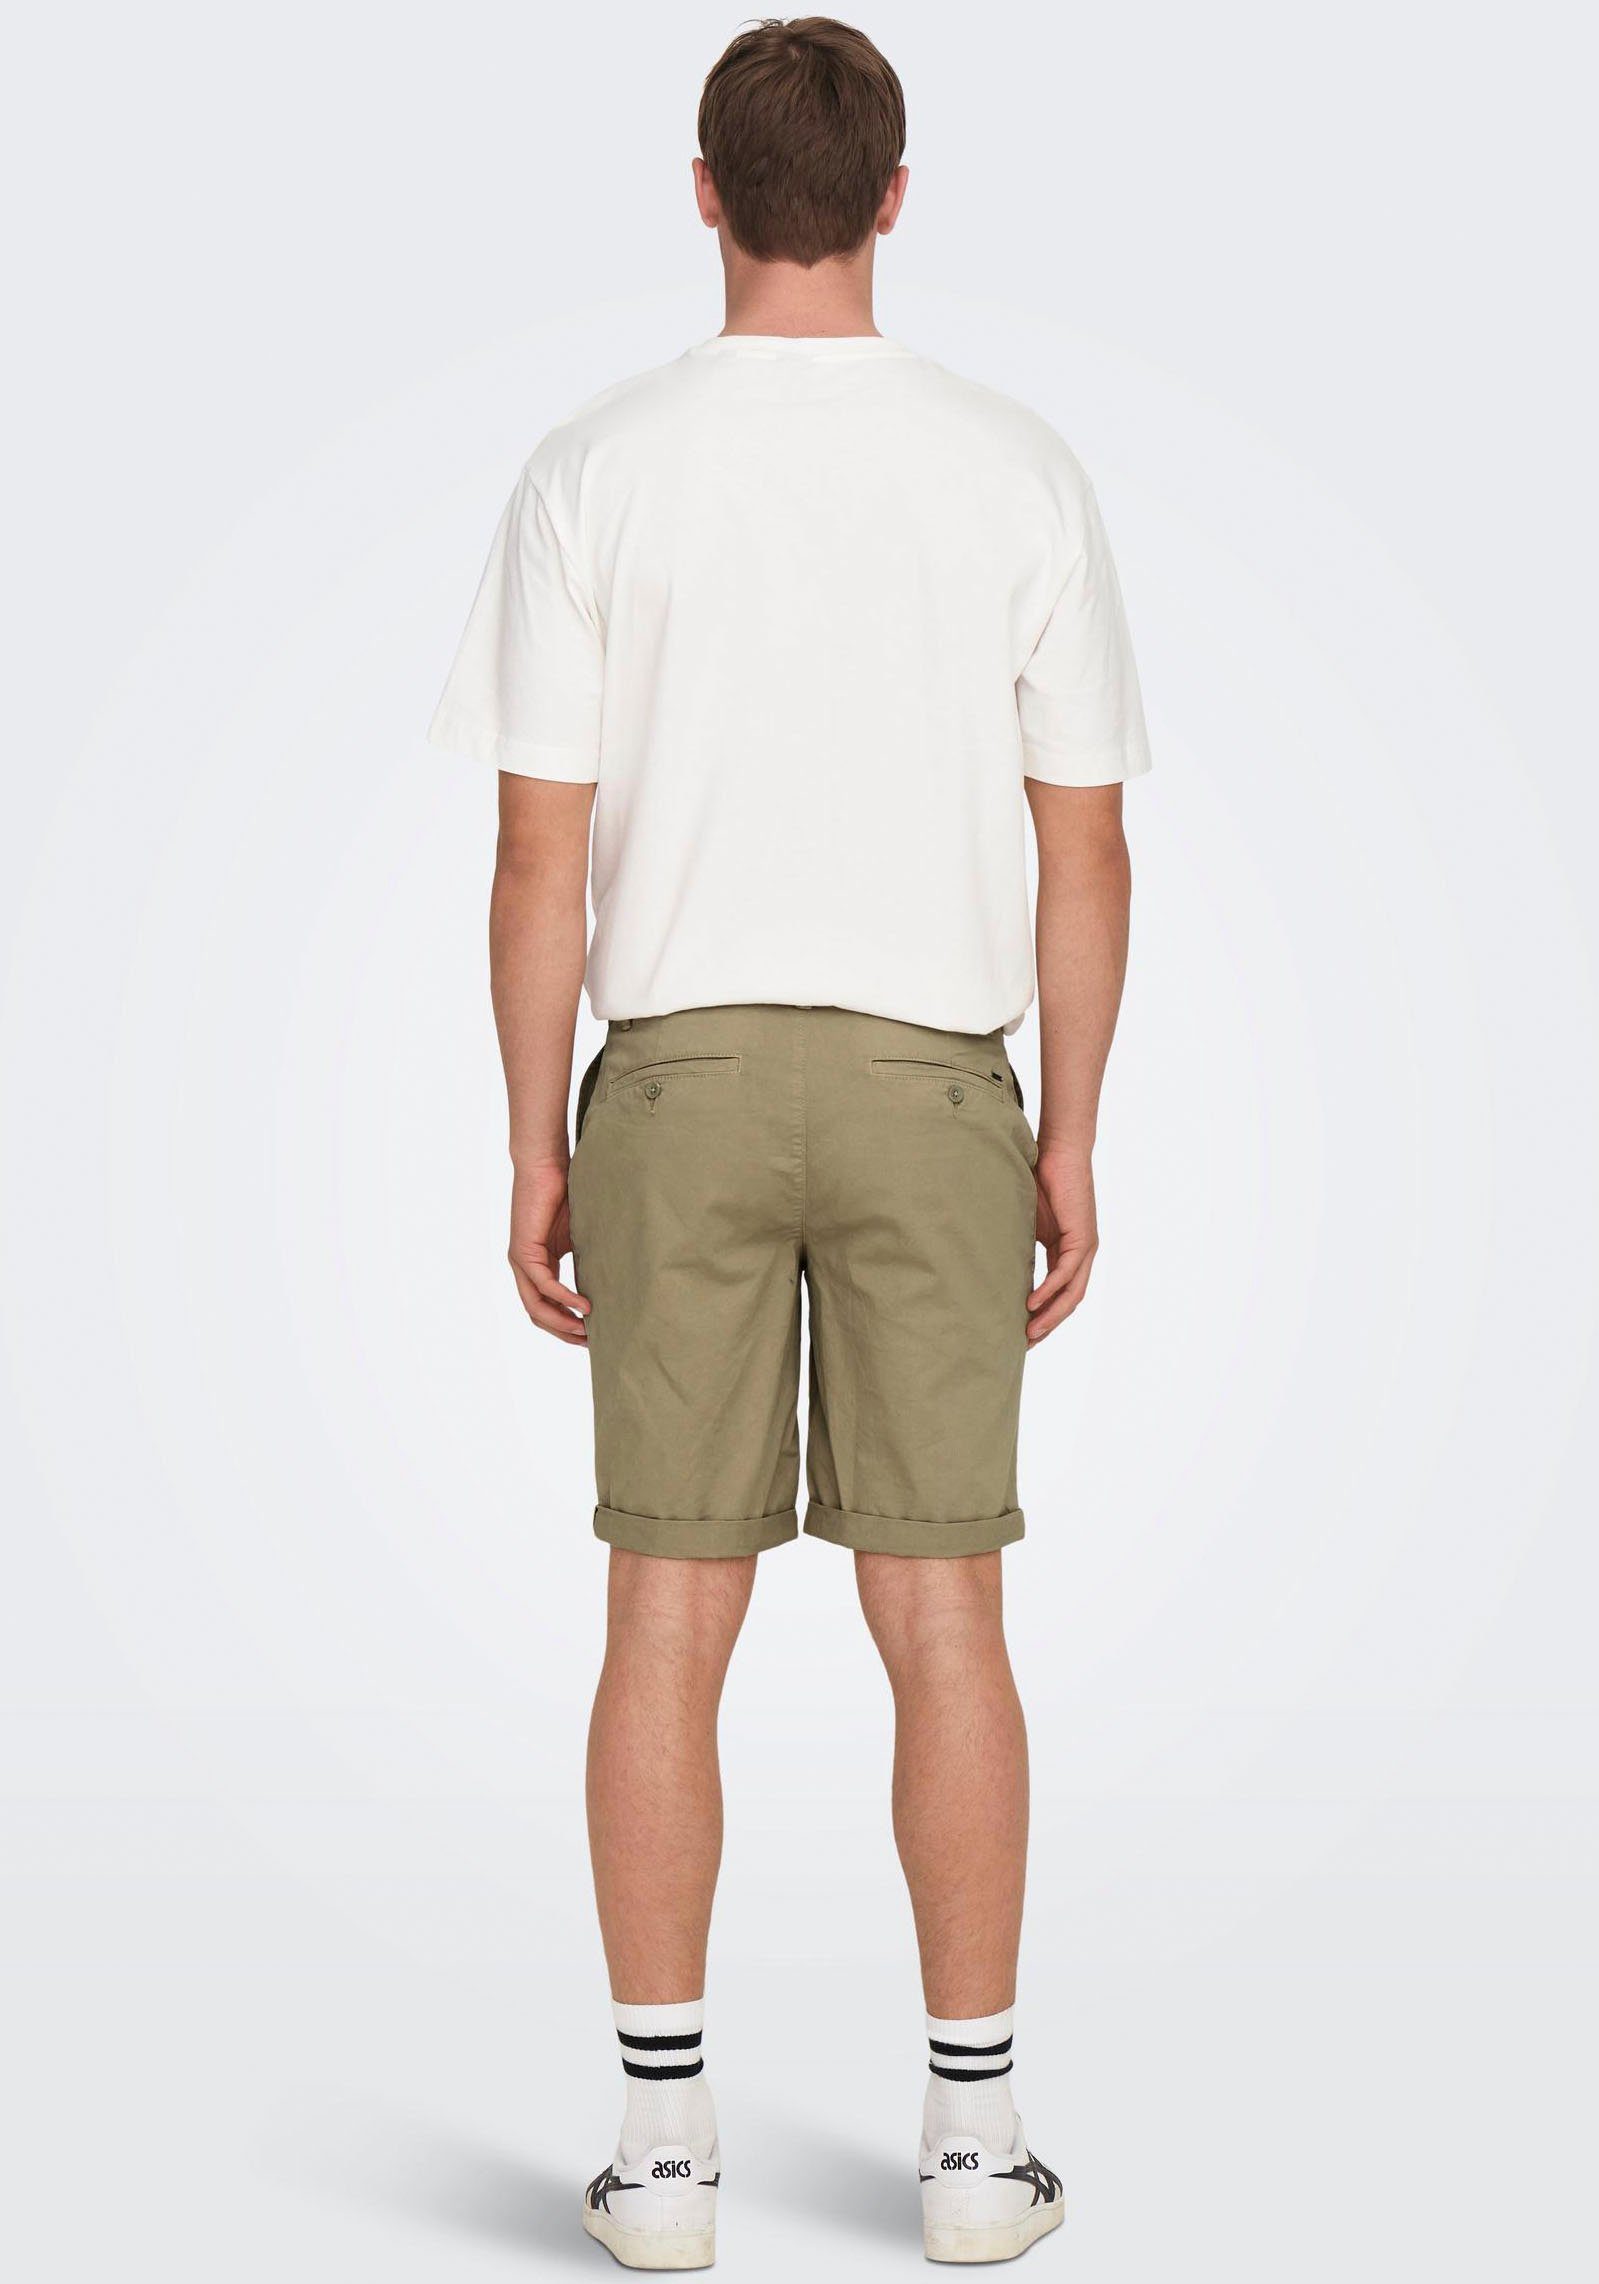 TWILL 4481 & SONS Chinchilla NOOS REG ONSPETER ONLY Jeansshorts SHORTS